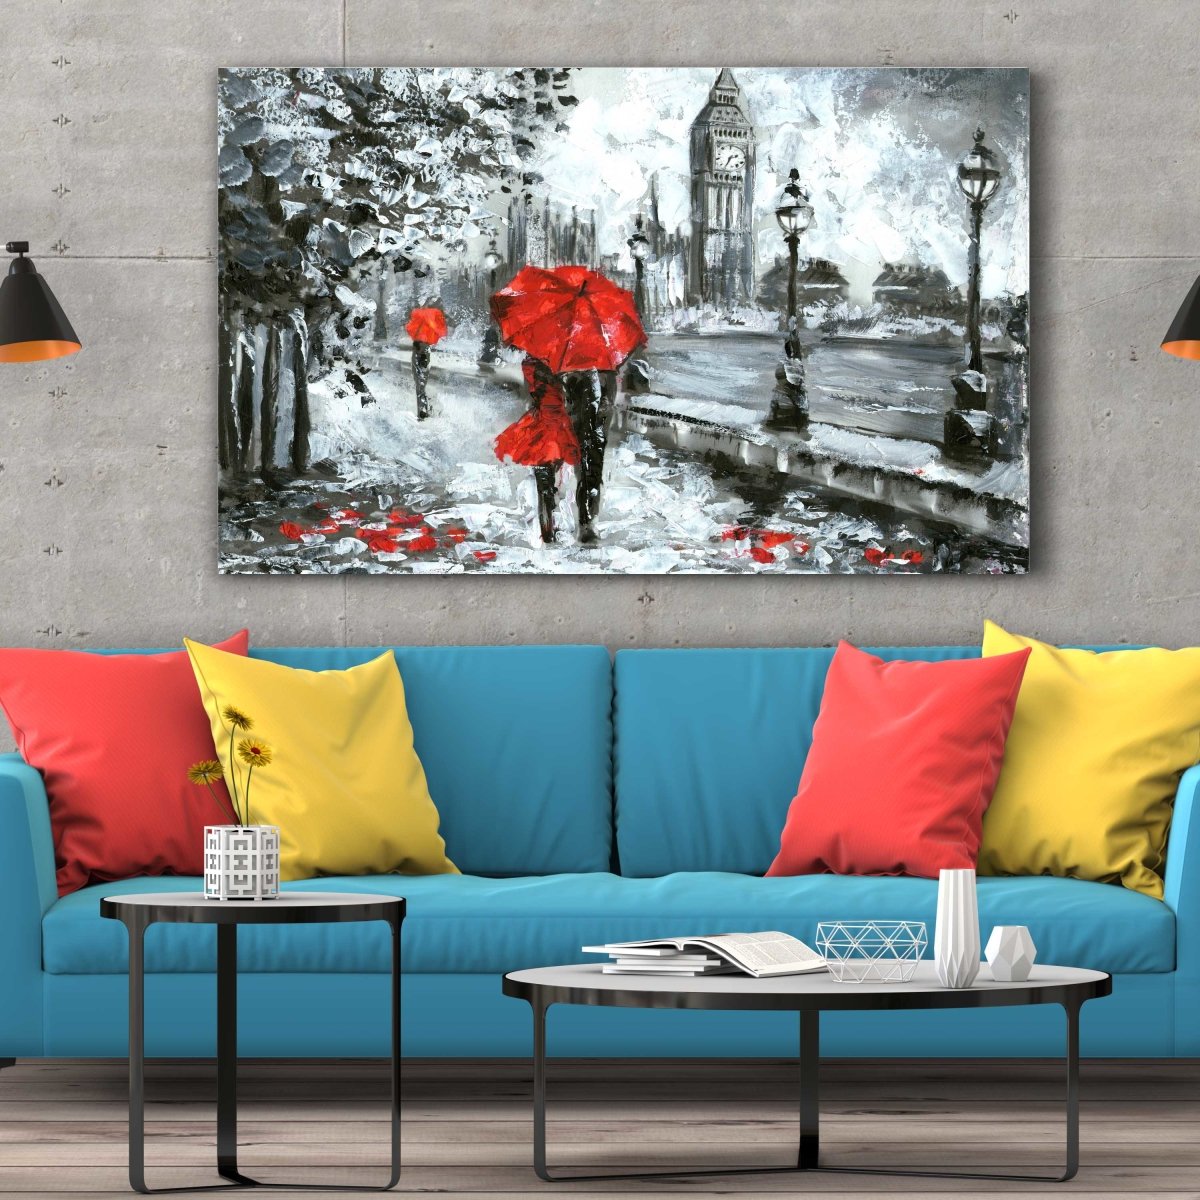 Tablou Canvas White and Red, Big Ben London - clevny.ro